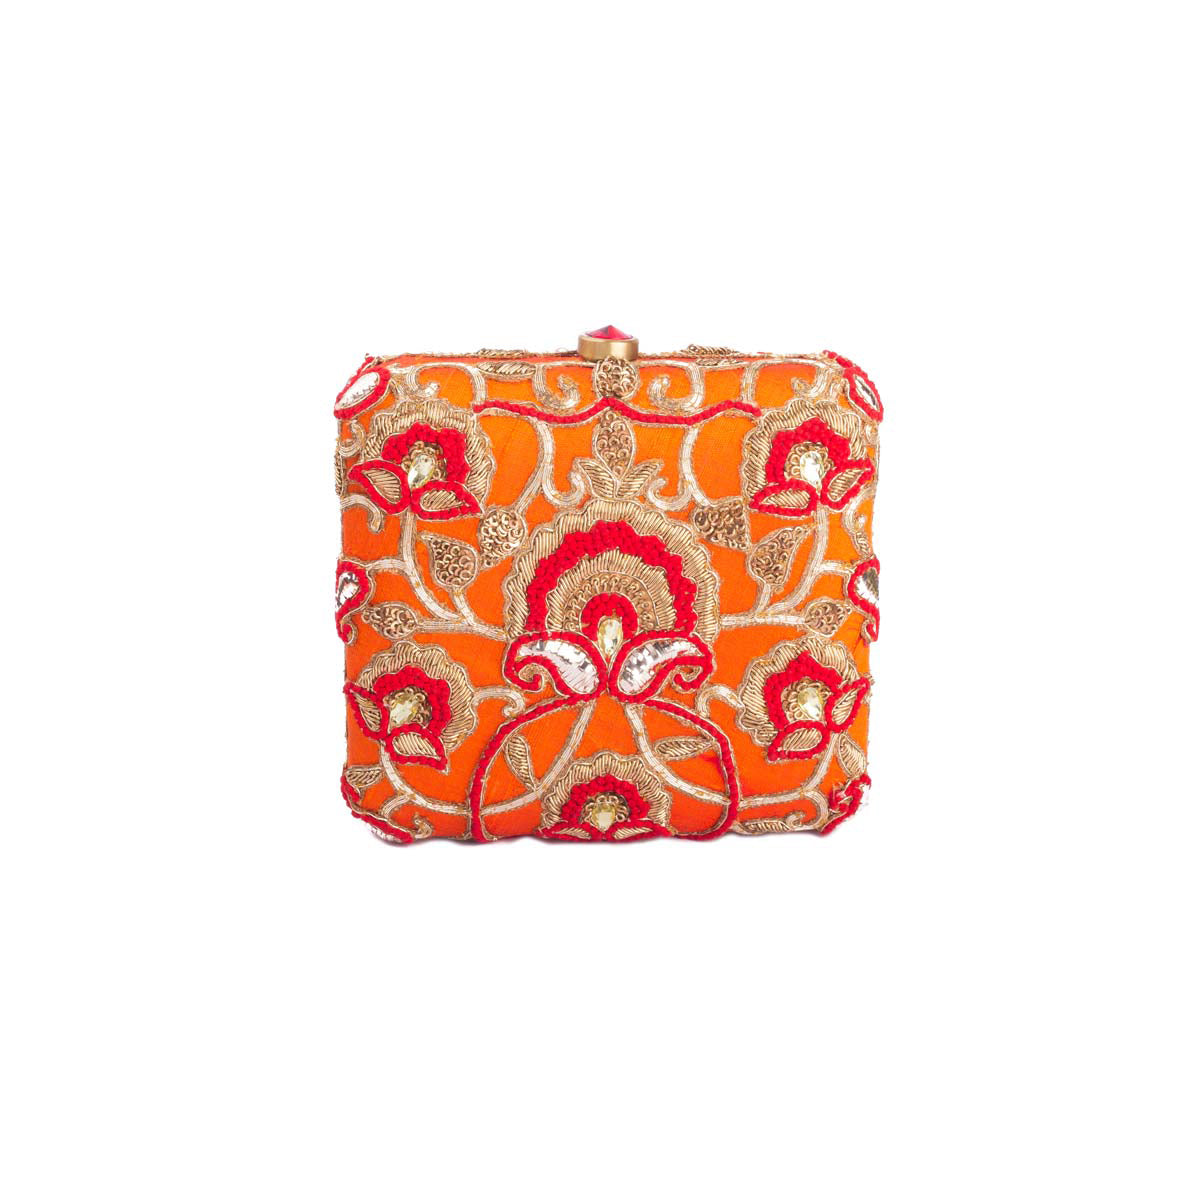 There's tons to brag about our Lovetobags! This deep orange clutch with red threadwork, zardosi embroidery and mukesh work detailing strikes all the right silhouettes at once.